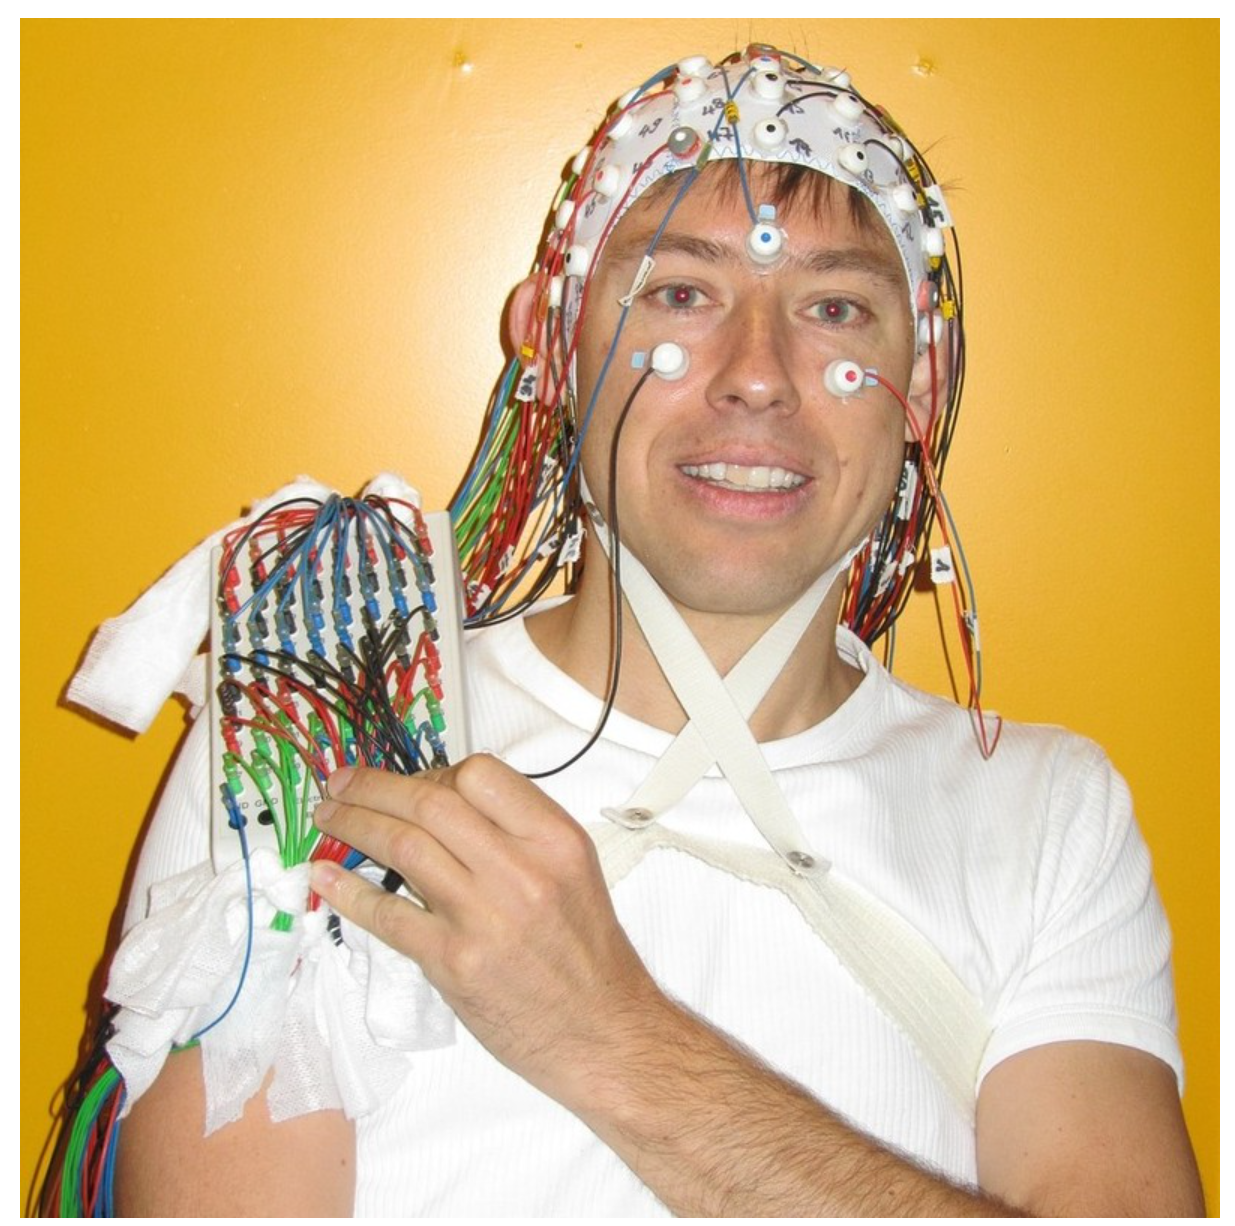 Photo of a young man wearing an EEG cap with abundant wires streaming from the cap covering much of his upper body.